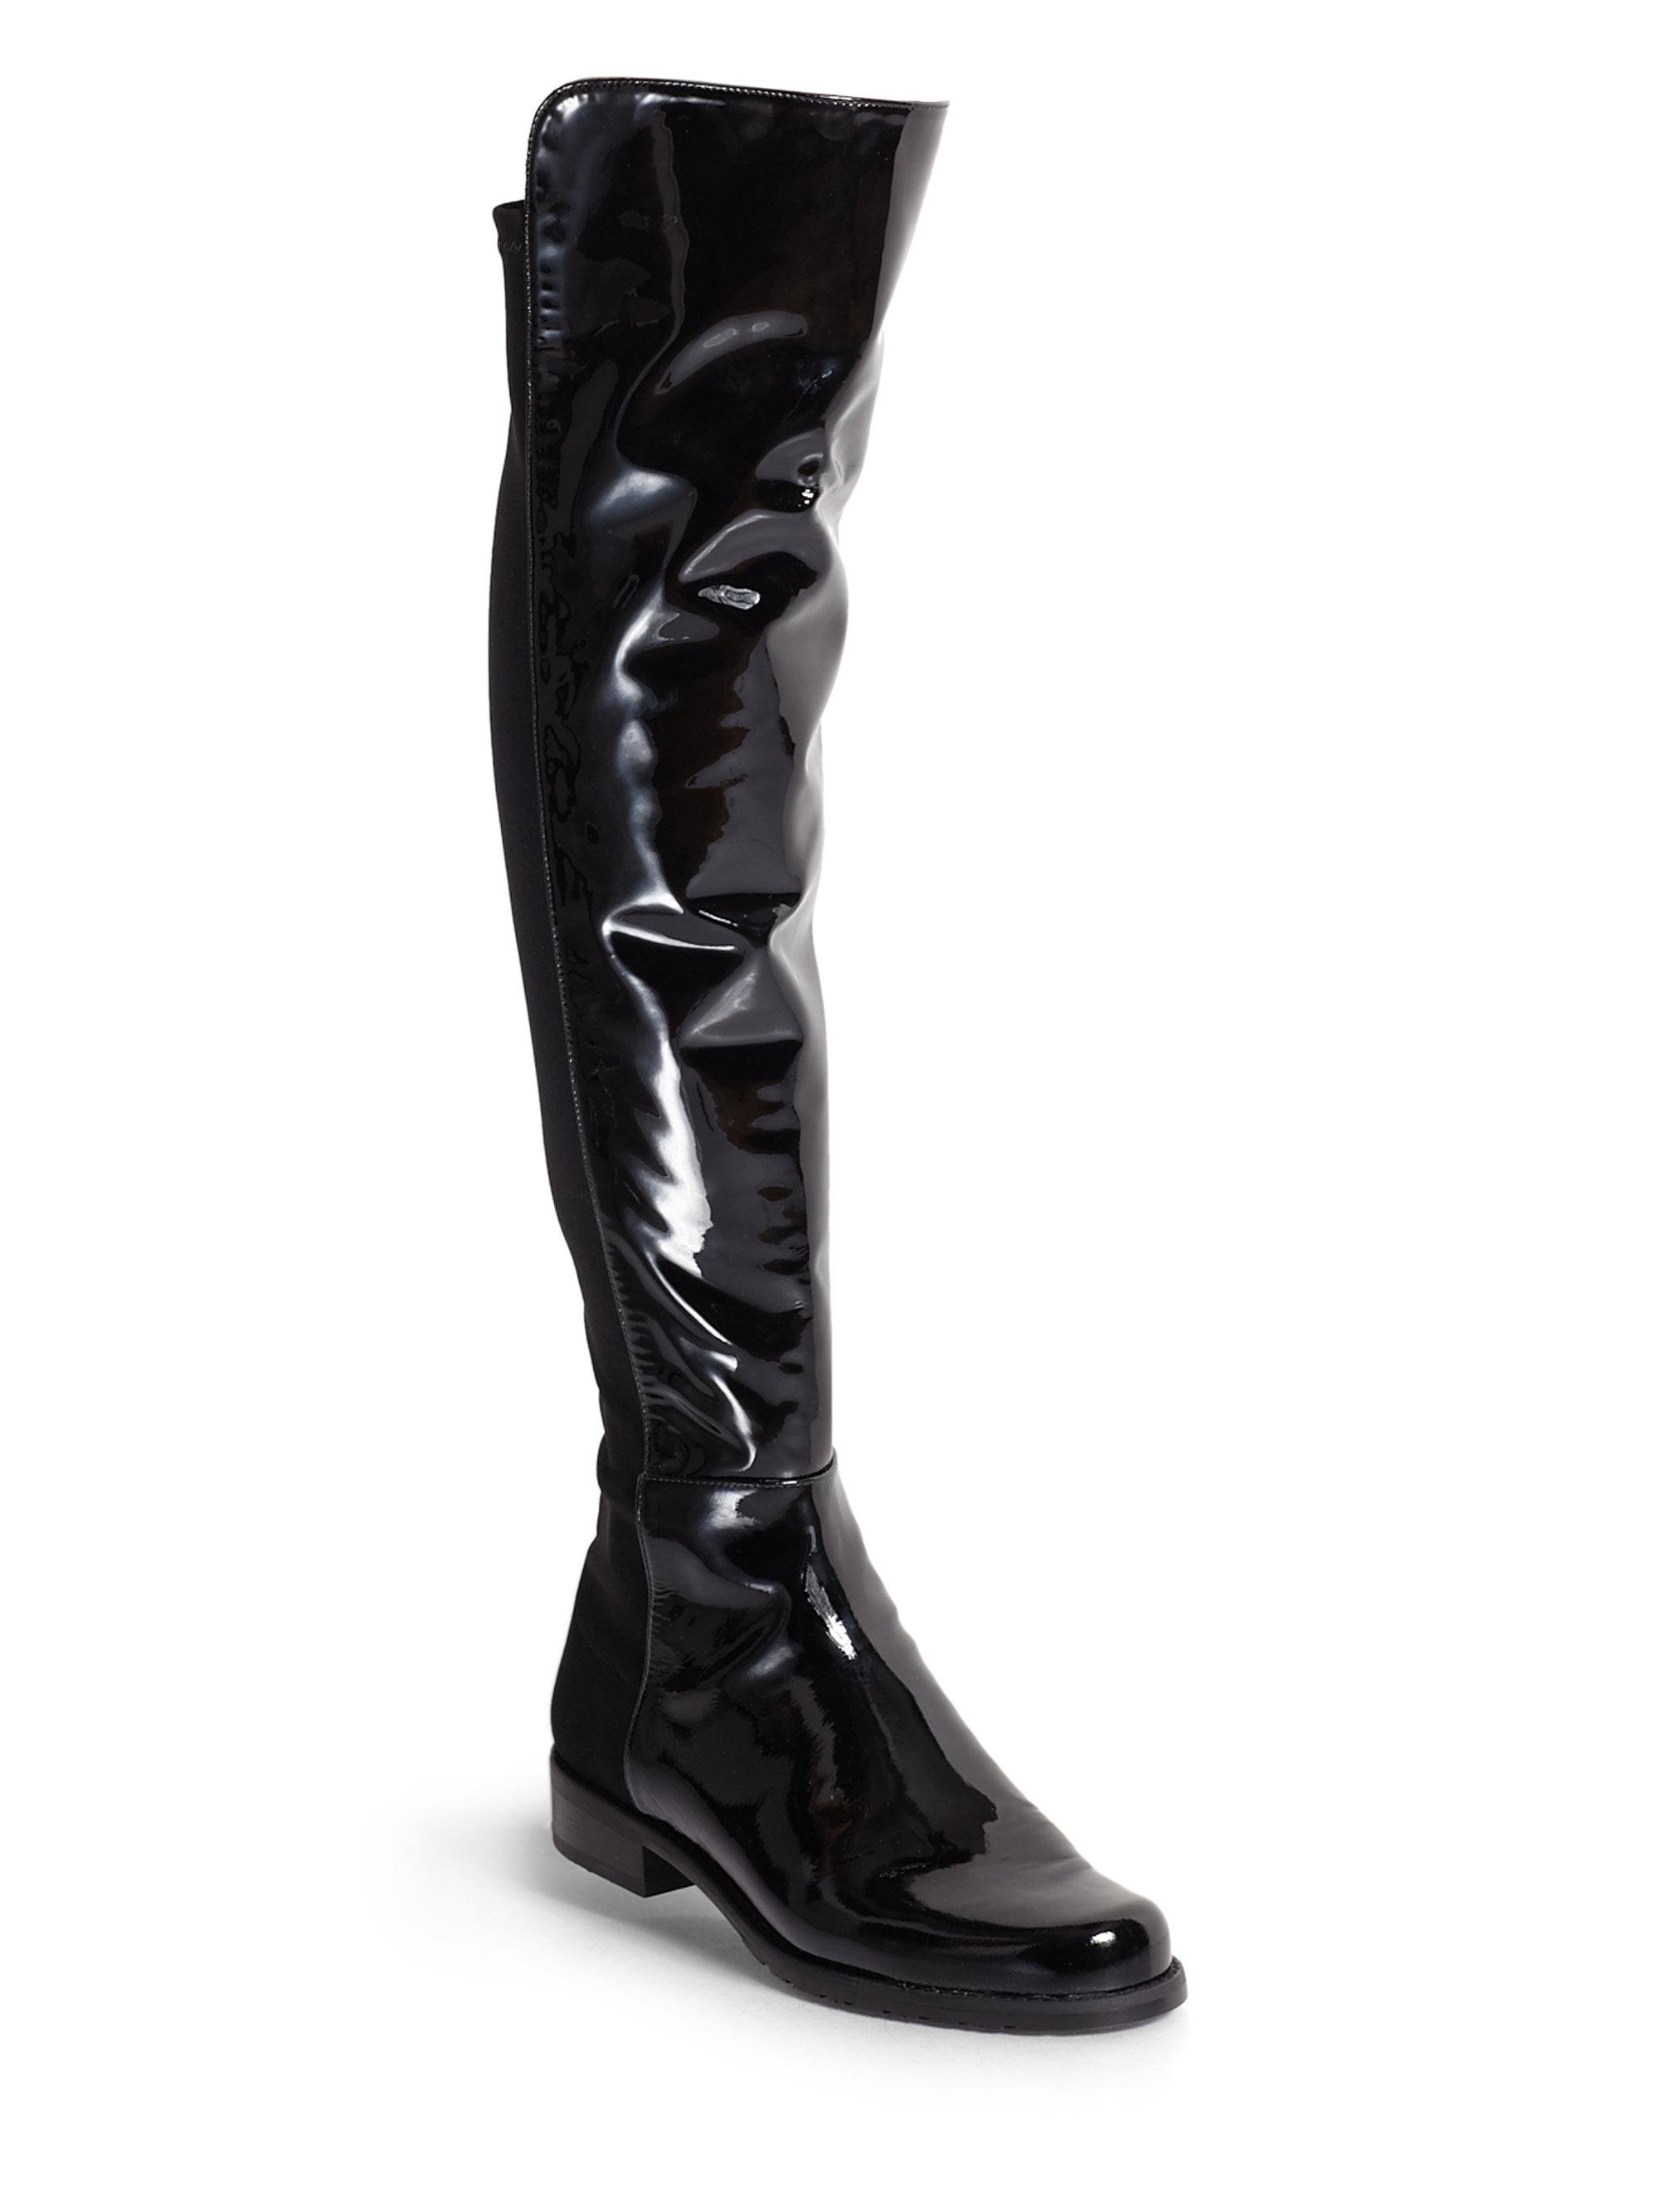 Lyst Stuart Weitzman 5050 Stretch Patent Leather Over The Knee Boots In Black